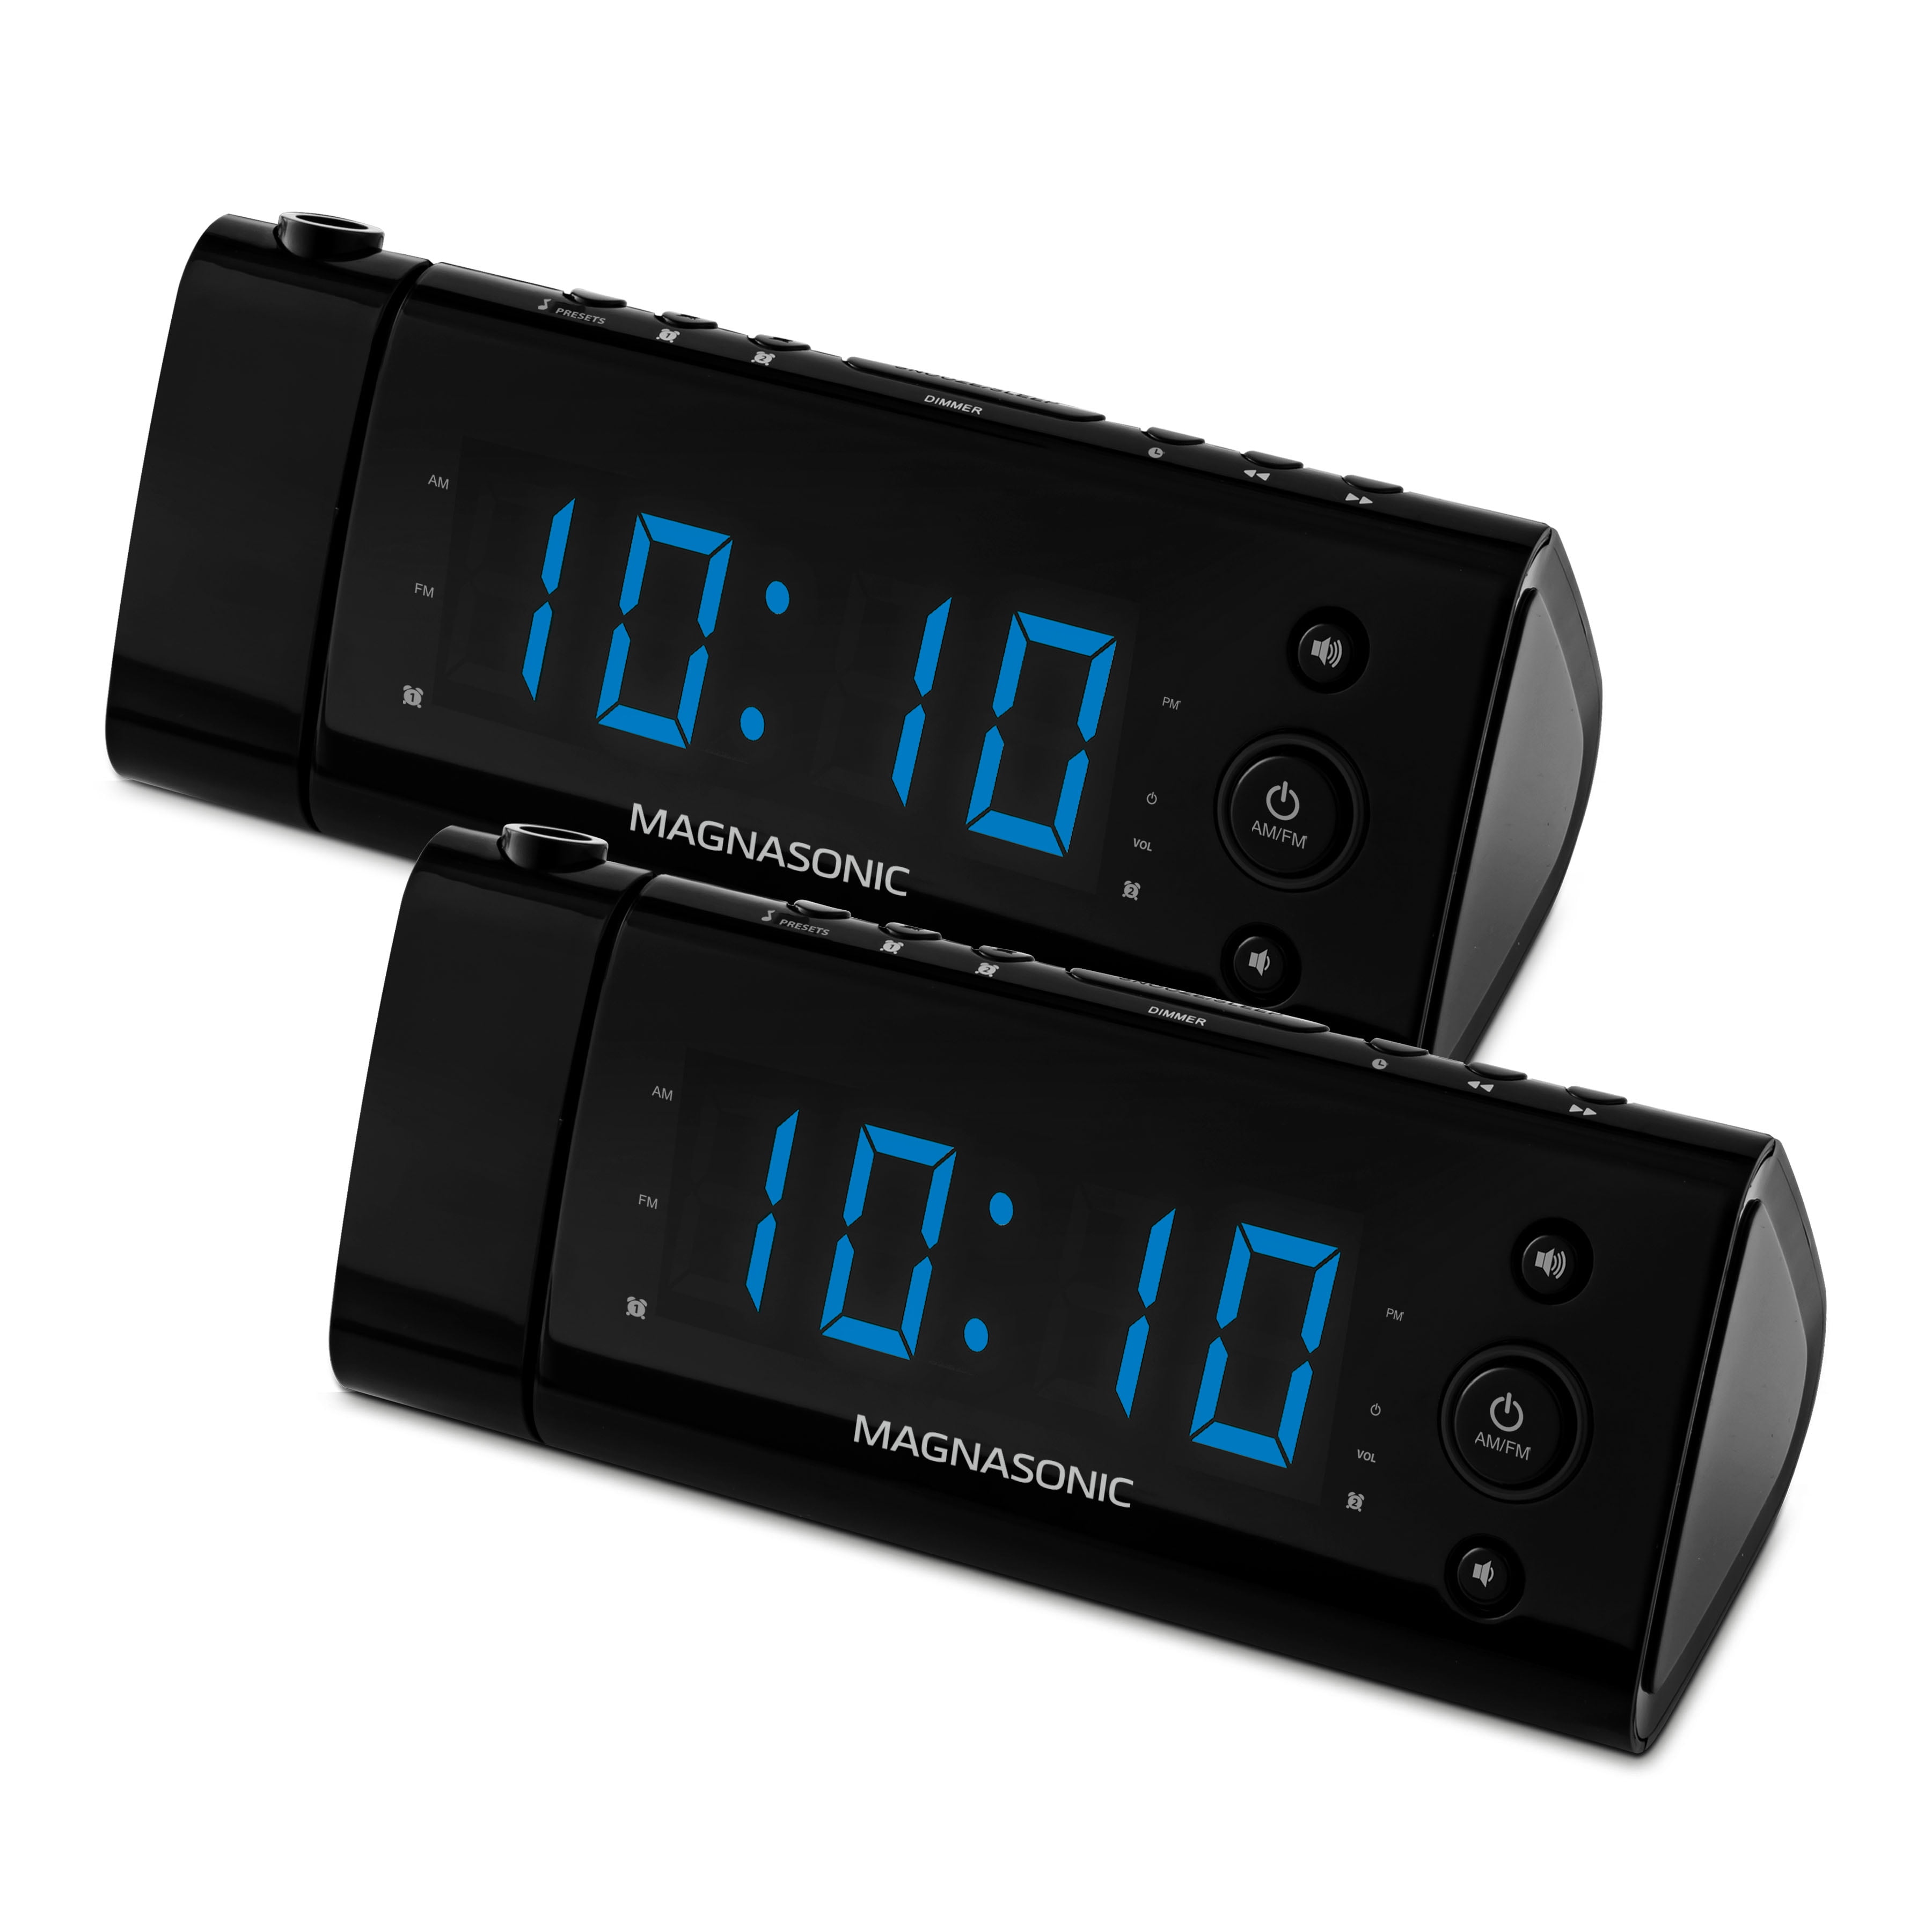 Time Projection Magnasonic Alarm Clock Radio with USB Charging for Smartphones 